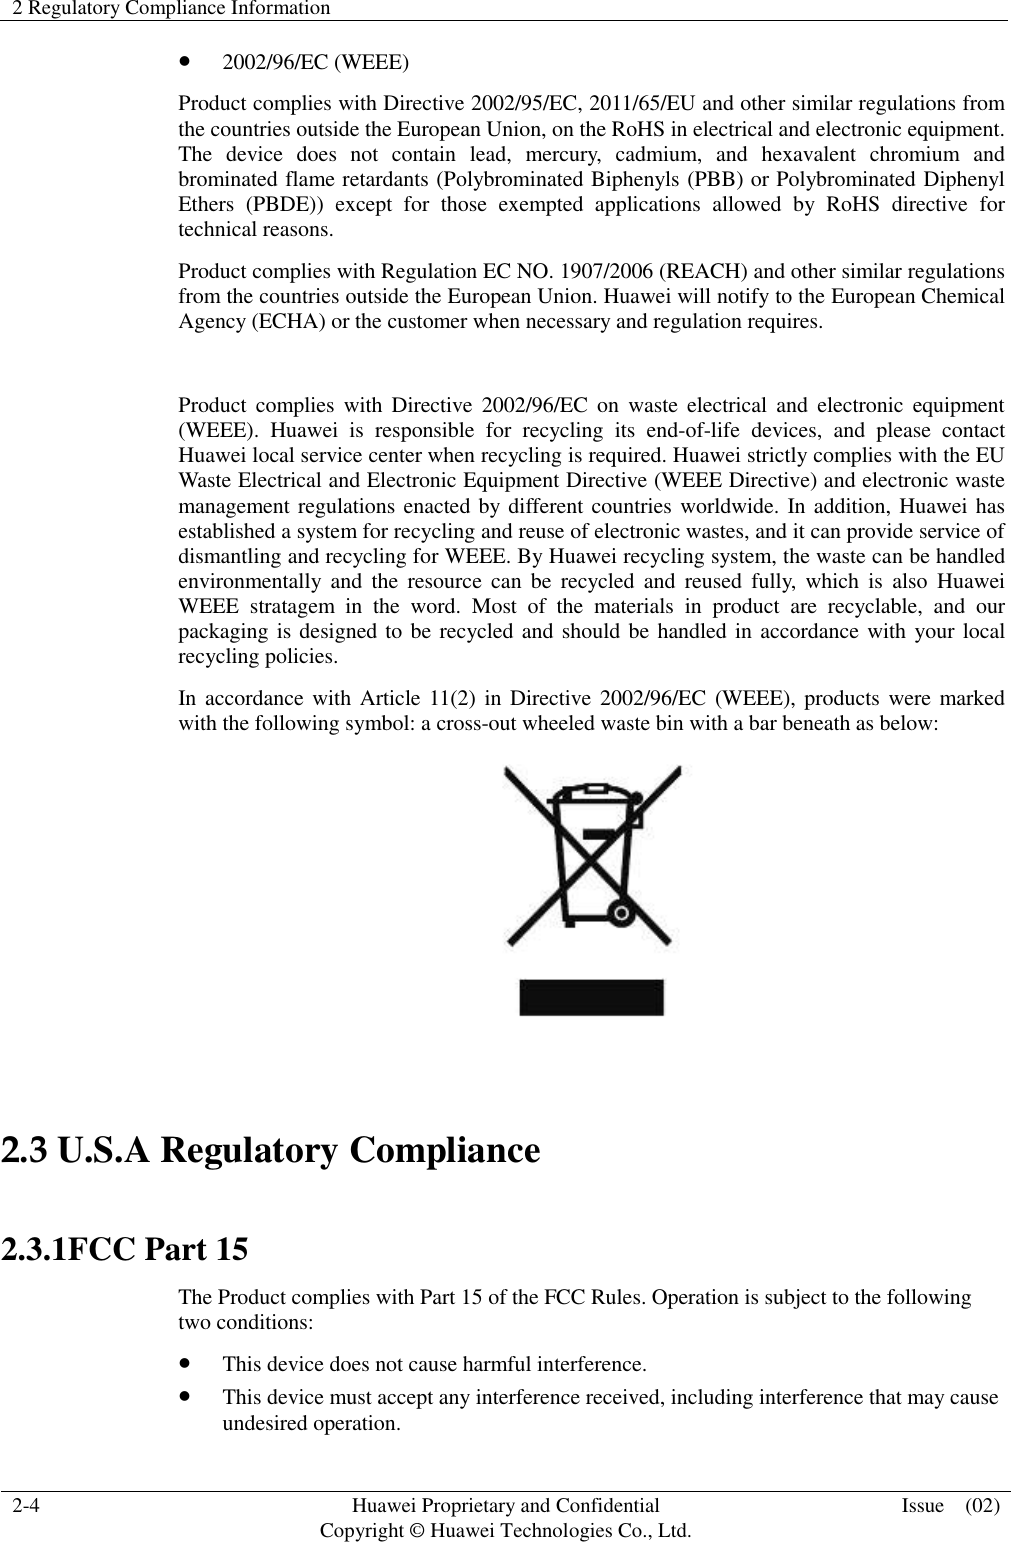 2 Regulatory Compliance Information    2-4 Huawei Proprietary and Confidential                                     Copyright © Huawei Technologies Co., Ltd. Issue    (02)   2002/96/EC (WEEE) Product complies with Directive 2002/95/EC, 2011/65/EU and other similar regulations from the countries outside the European Union, on the RoHS in electrical and electronic equipment. The  device  does  not  contain  lead,  mercury,  cadmium,  and  hexavalent  chromium  and brominated flame retardants (Polybrominated Biphenyls (PBB) or Polybrominated Diphenyl Ethers  (PBDE))  except  for  those  exempted  applications  allowed  by  RoHS  directive  for technical reasons.   Product complies with Regulation EC NO. 1907/2006 (REACH) and other similar regulations from the countries outside the European Union. Huawei will notify to the European Chemical Agency (ECHA) or the customer when necessary and regulation requires.  Product  complies  with  Directive  2002/96/EC on  waste  electrical  and  electronic  equipment (WEEE).  Huawei  is  responsible  for  recycling  its  end-of-life  devices,  and  please  contact Huawei local service center when recycling is required. Huawei strictly complies with the EU Waste Electrical and Electronic Equipment Directive (WEEE Directive) and electronic waste management regulations enacted by different countries worldwide. In addition, Huawei has established a system for recycling and reuse of electronic wastes, and it can provide service of dismantling and recycling for WEEE. By Huawei recycling system, the waste can be handled environmentally  and  the  resource can be recycled  and  reused  fully,  which  is  also  Huawei WEEE  stratagem  in  the  word.  Most  of  the  materials  in  product  are  recyclable,  and  our packaging is designed to be recycled and should be handled in accordance with your local recycling policies.   In accordance with  Article 11(2) in Directive 2002/96/EC  (WEEE), products  were  marked with the following symbol: a cross-out wheeled waste bin with a bar beneath as below:   2.3 U.S.A Regulatory Compliance    2.3.1FCC Part 15 The Product complies with Part 15 of the FCC Rules. Operation is subject to the following two conditions:  This device does not cause harmful interference.  This device must accept any interference received, including interference that may cause undesired operation. 